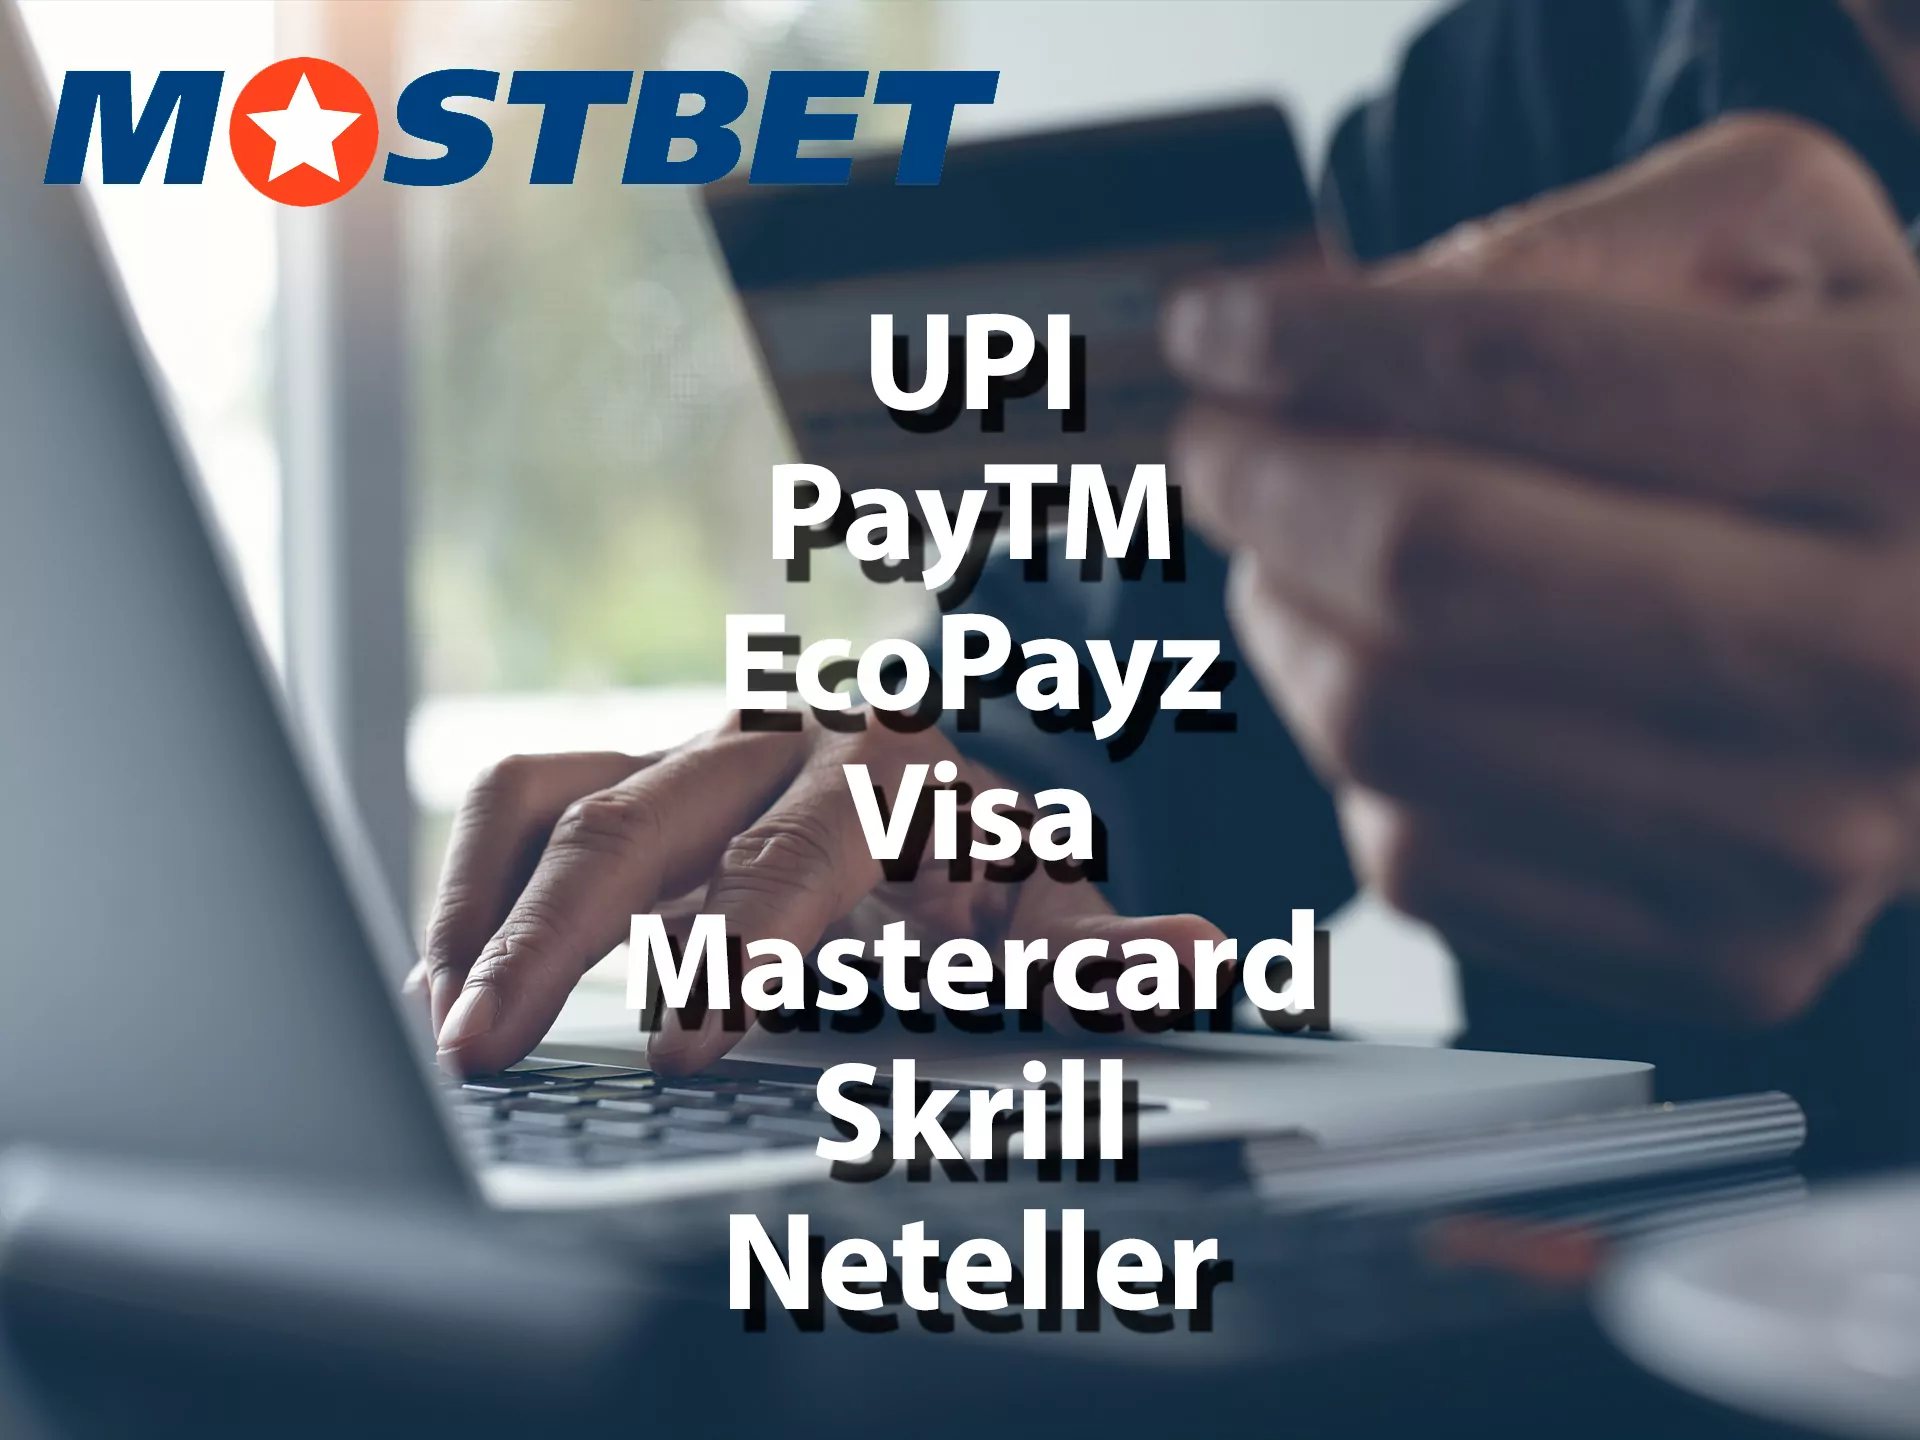 Mostbet offers the most popular payment methods for Indian players.